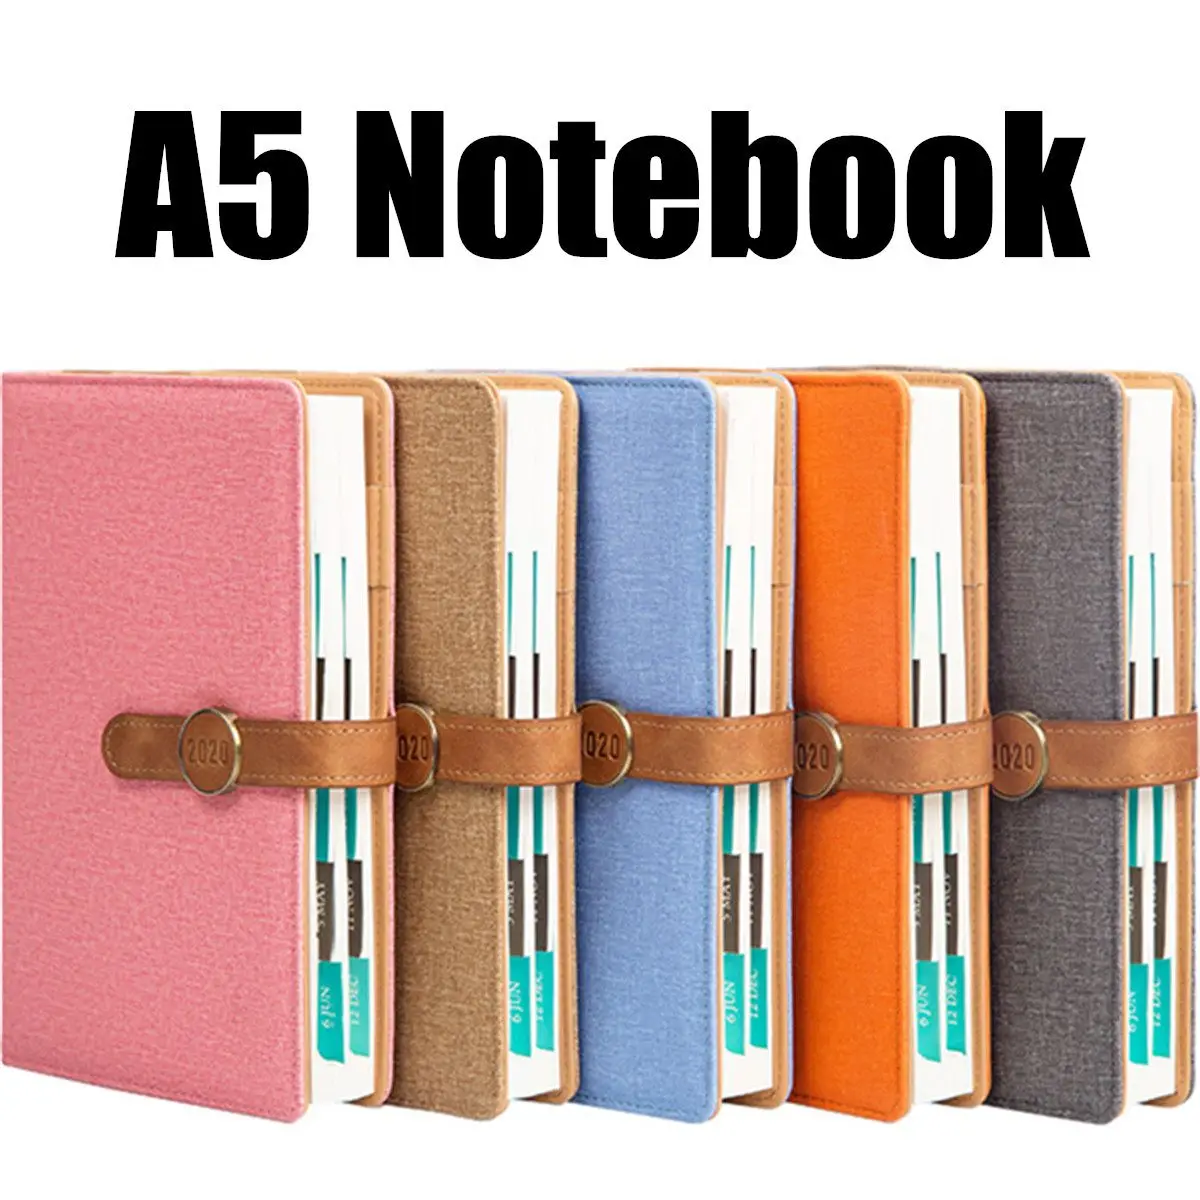 

2021 Agenda A5 Soft Cover Spiral Ring Planner Notebook Hardcover Notebook Weekly Schedule Leather Agenda Diary Notebook